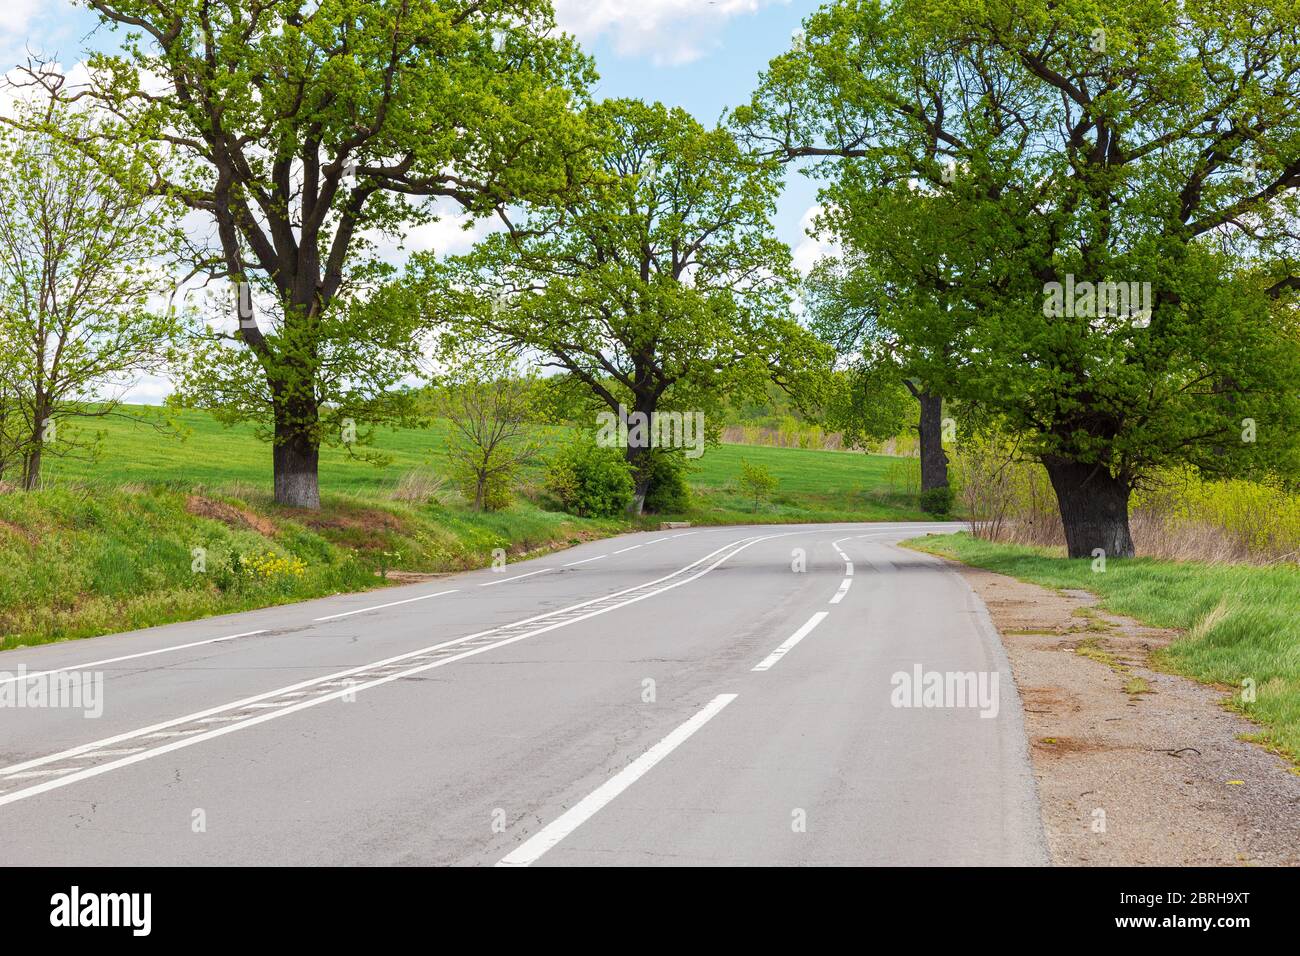 Paved road with road markings and trees on the side of the road in summer day. Stock Photo